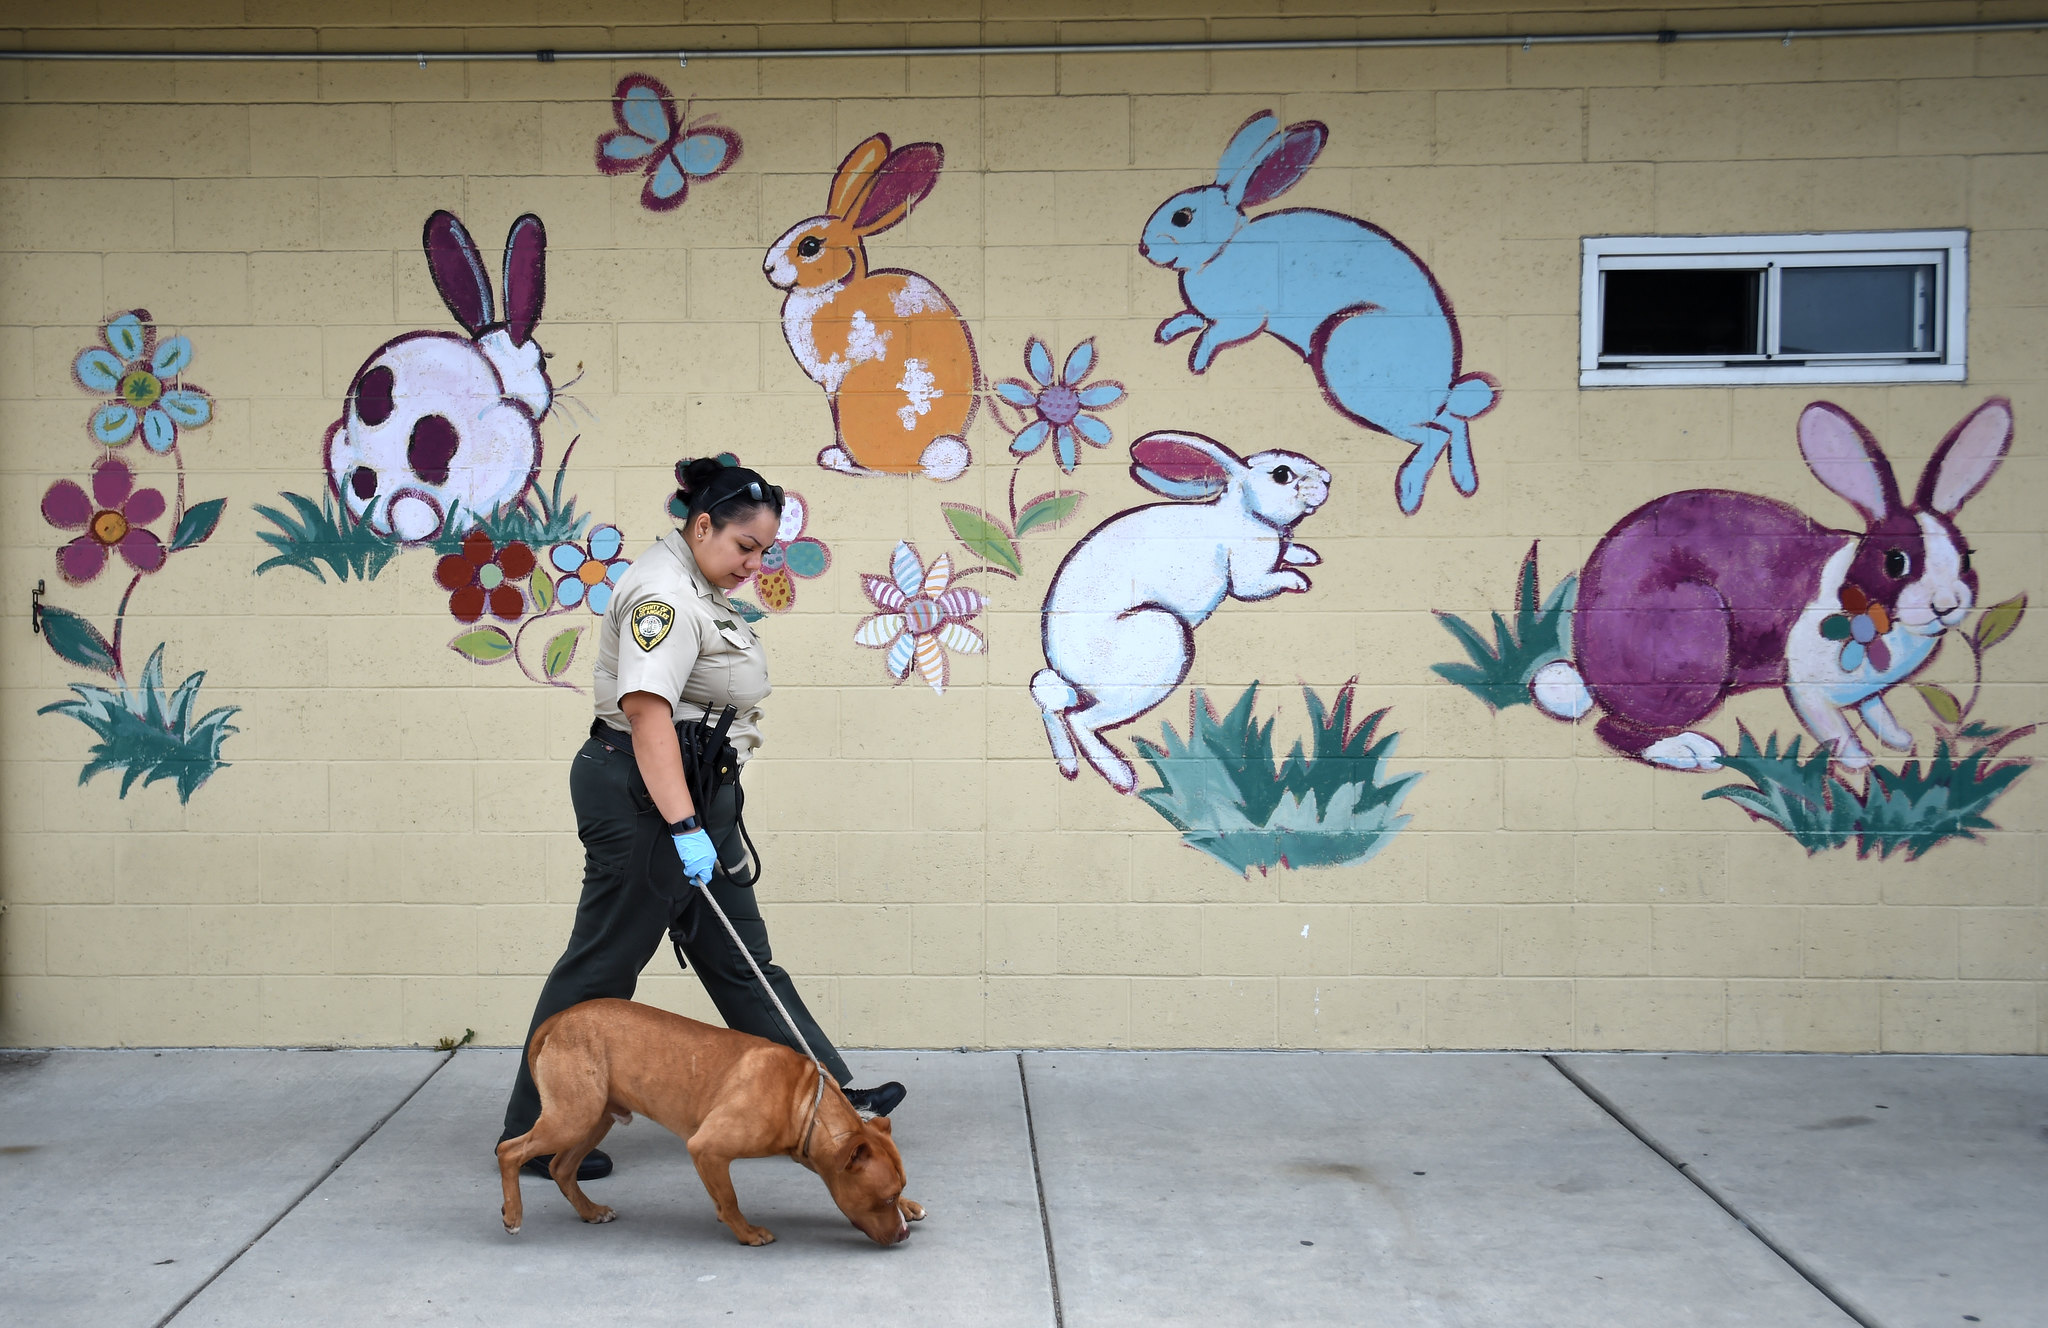 Animal Care staff walks a dog at one of their facilities.